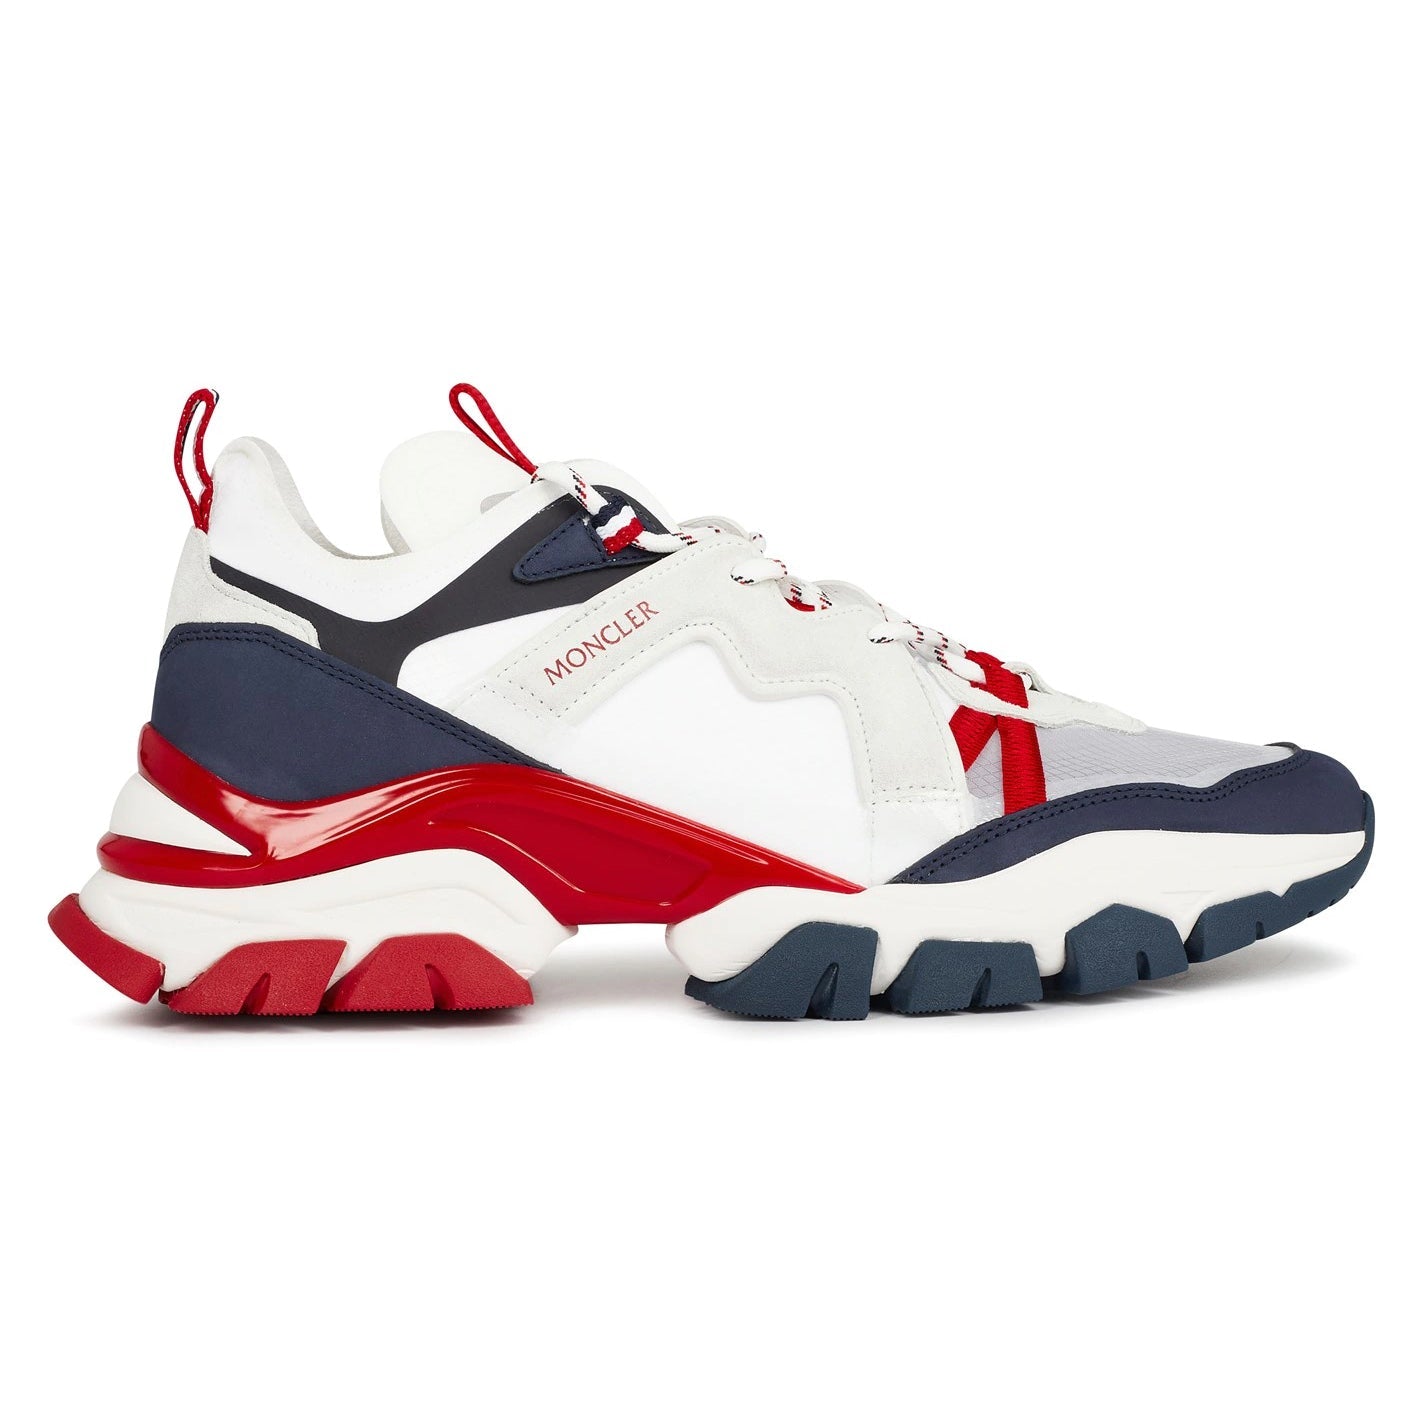 Moncler Leave No Trace Trainers Red/White